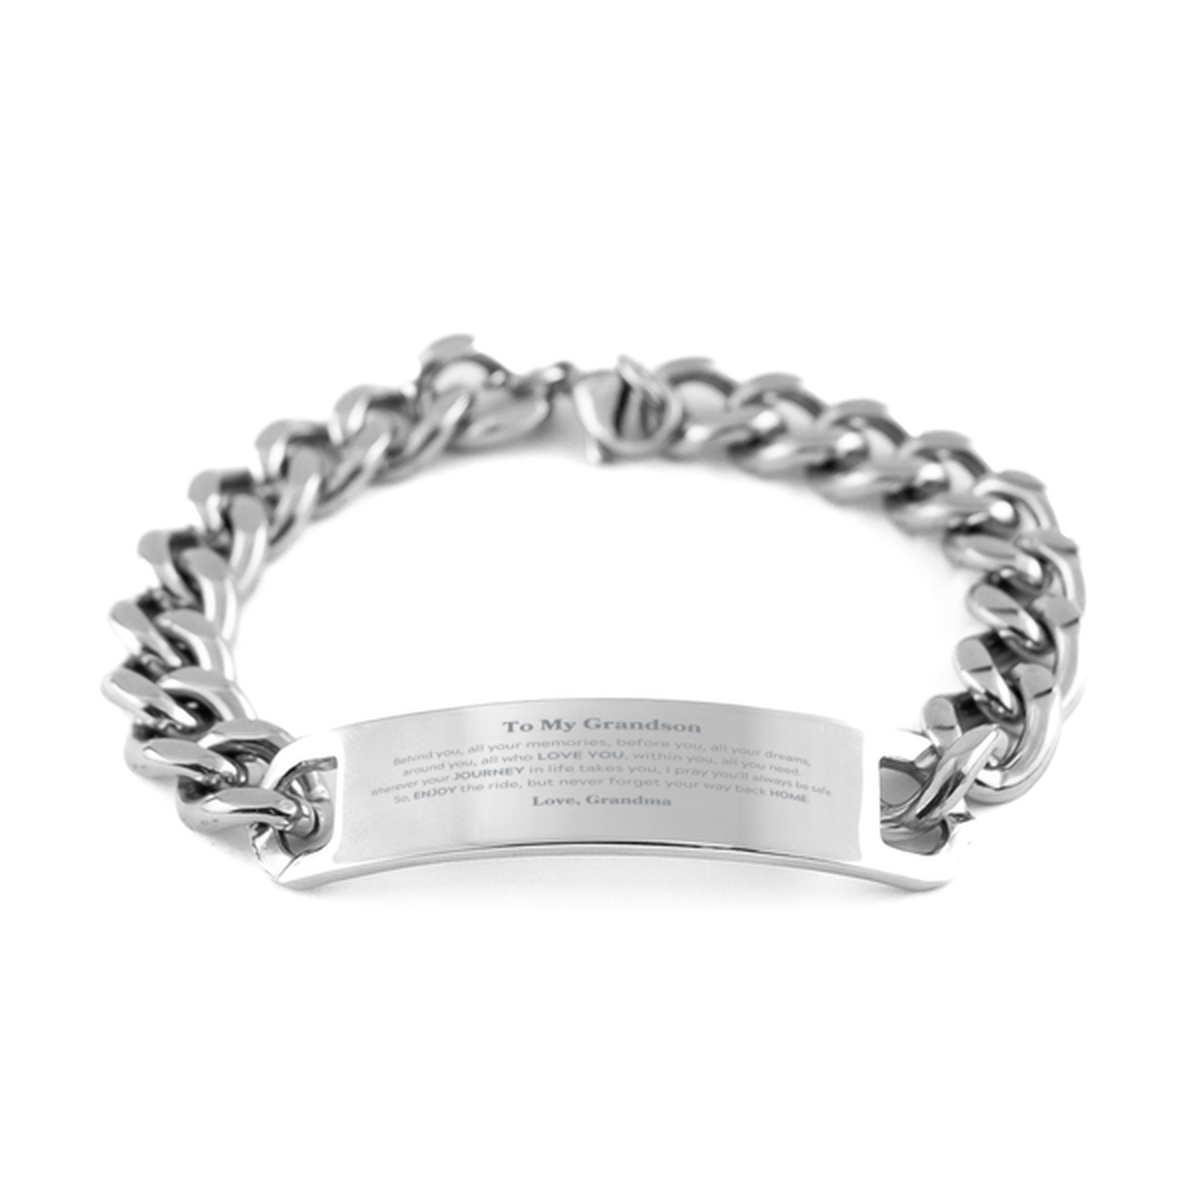 To My Grandson Graduation Gifts from Grandma, Grandson Cuban Chain Stainless Steel Bracelet Christmas Birthday Gifts for Grandson Behind you, all your memories, before you, all your dreams. Love, Grandma